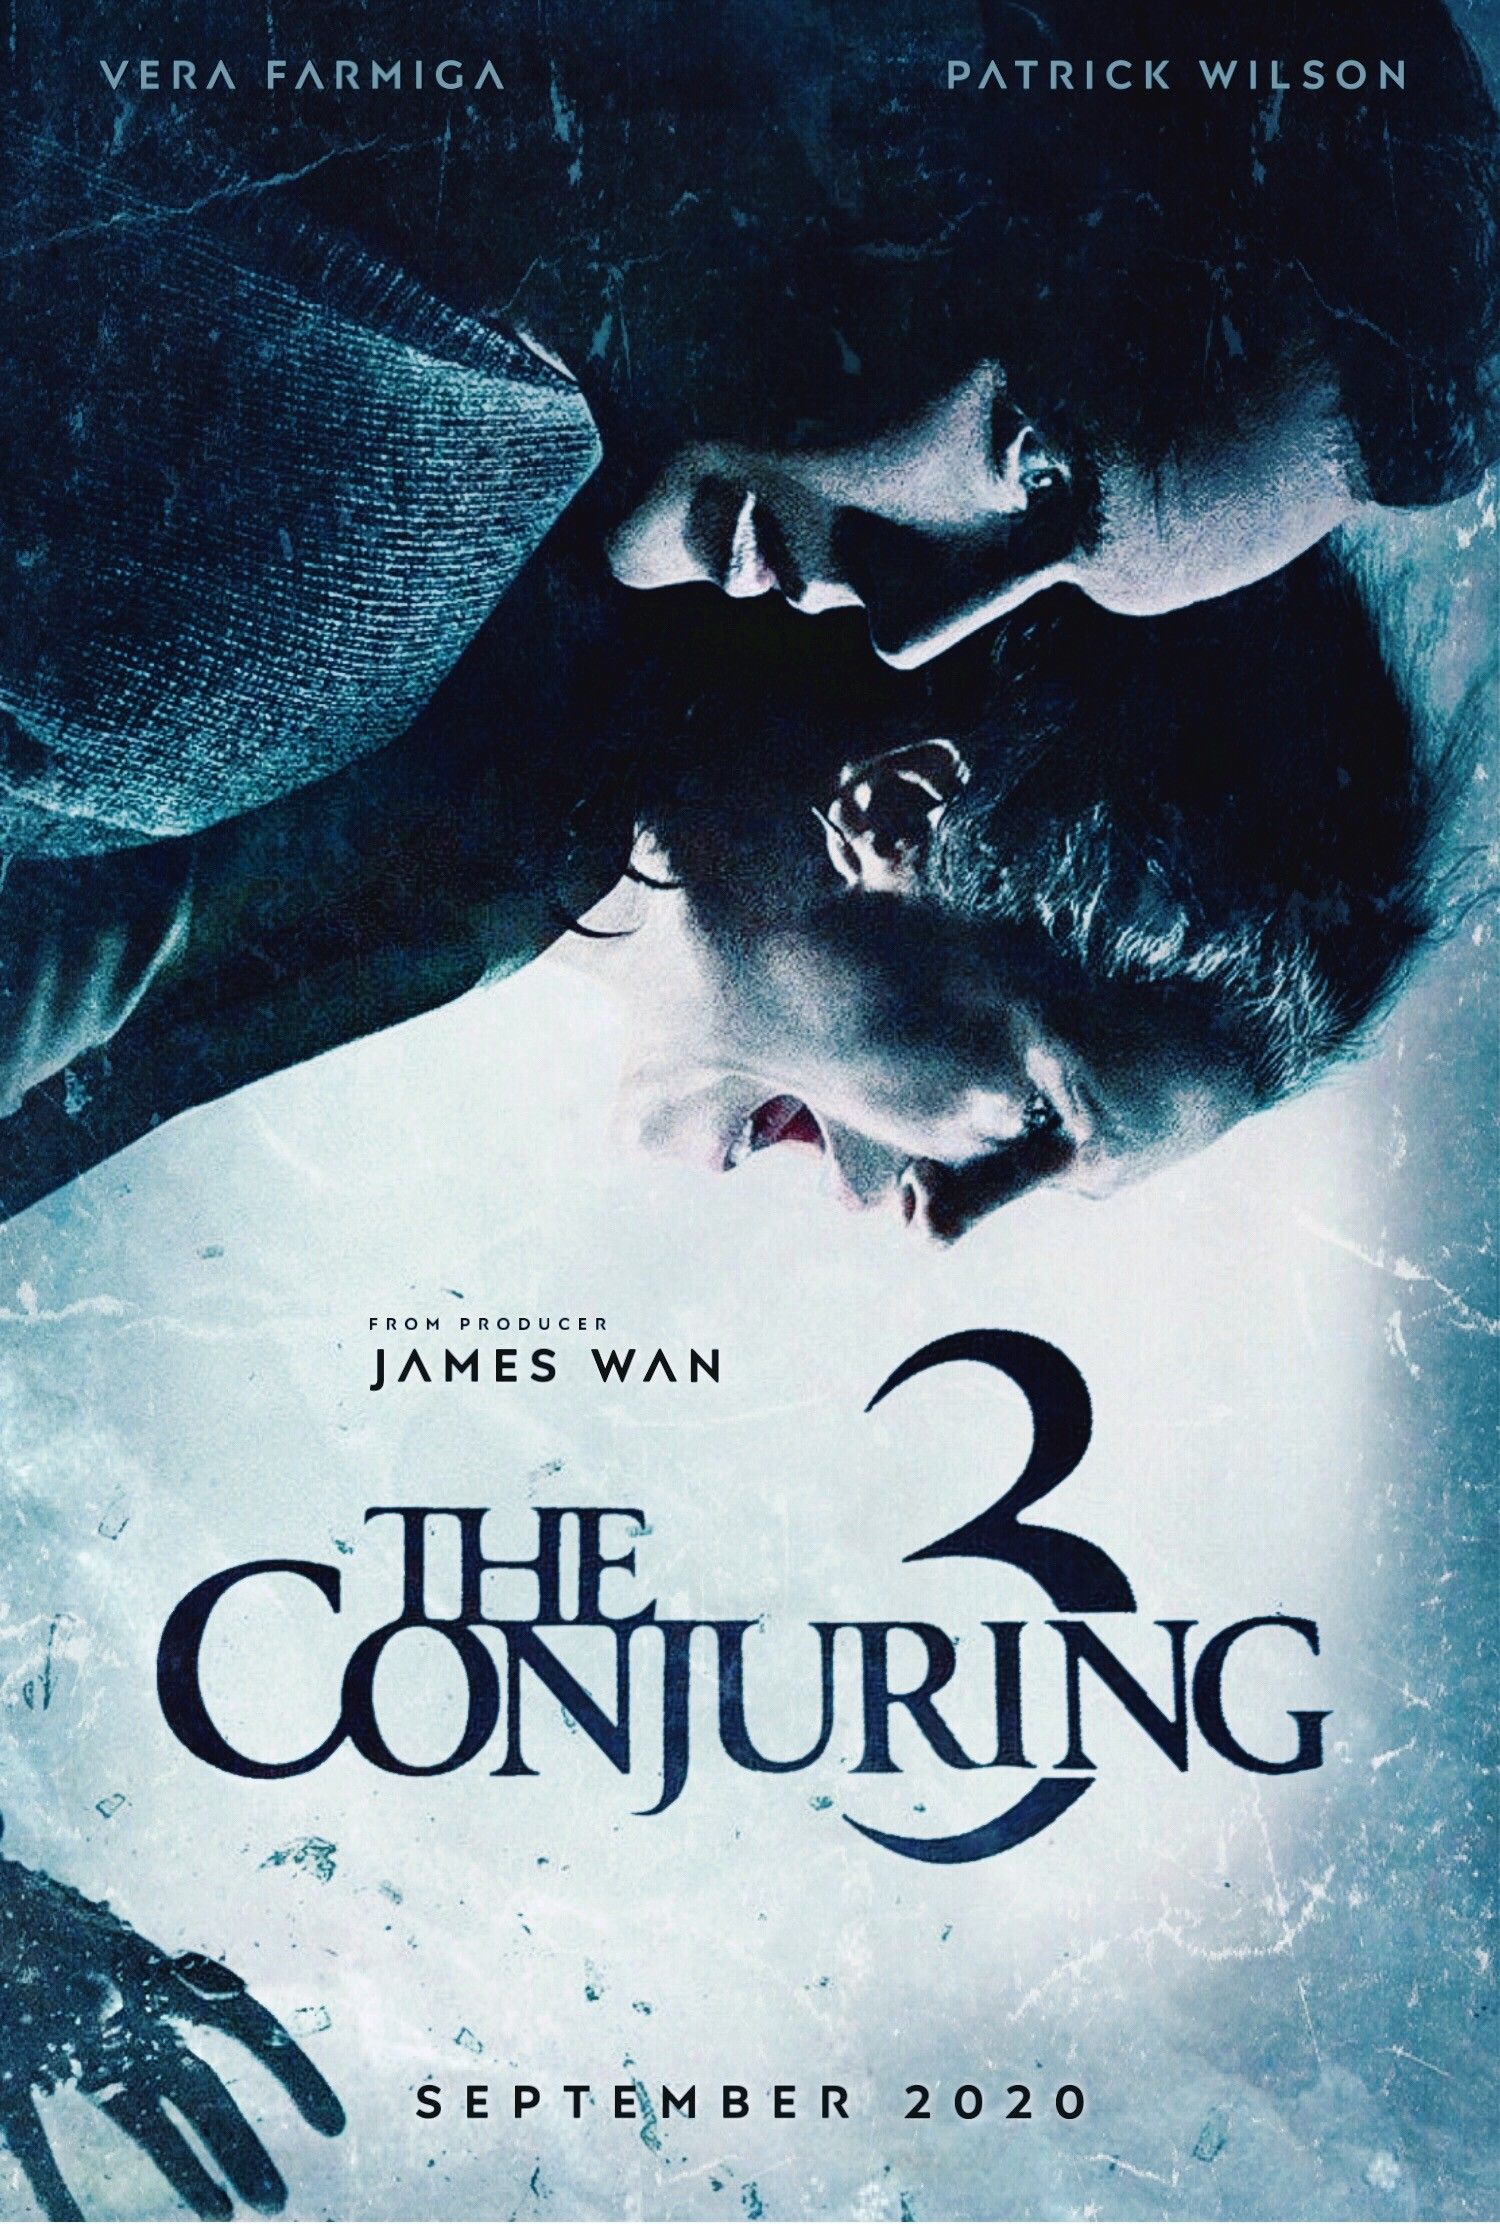 The Conjuring: The Devil Made Me Do It – WiKi, Cast, Review, Trailer, Story, Image, Biography